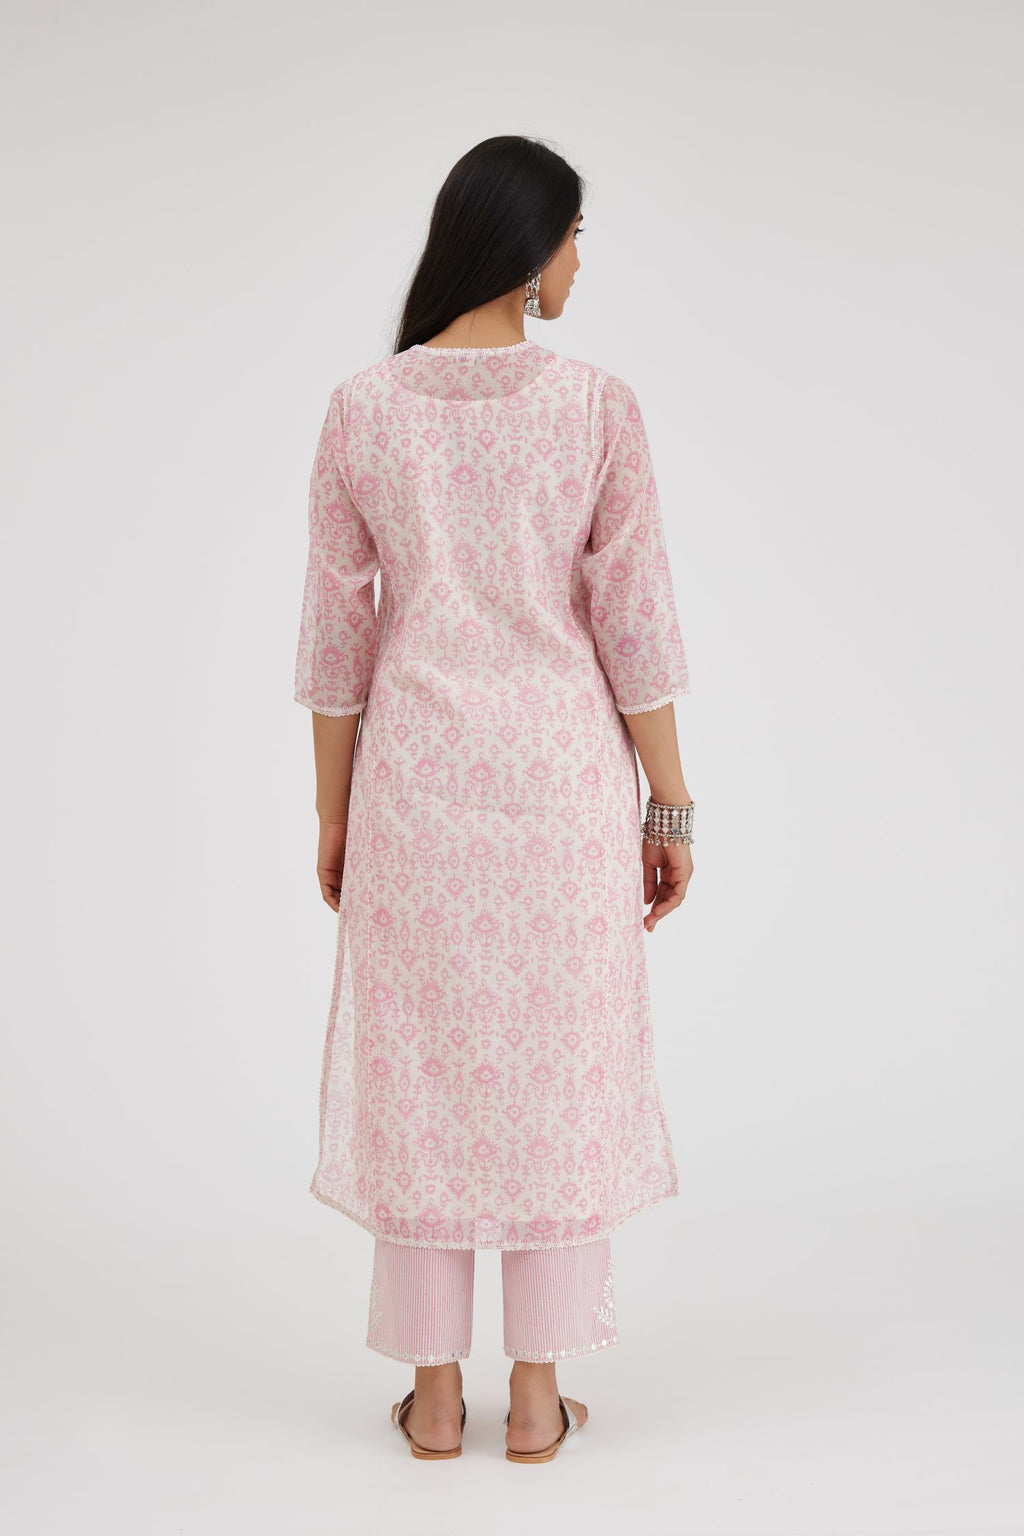 Ikat design pink and off white hand block-printed Cotton Chanderi straight long kurta set with round neck and front button placket.